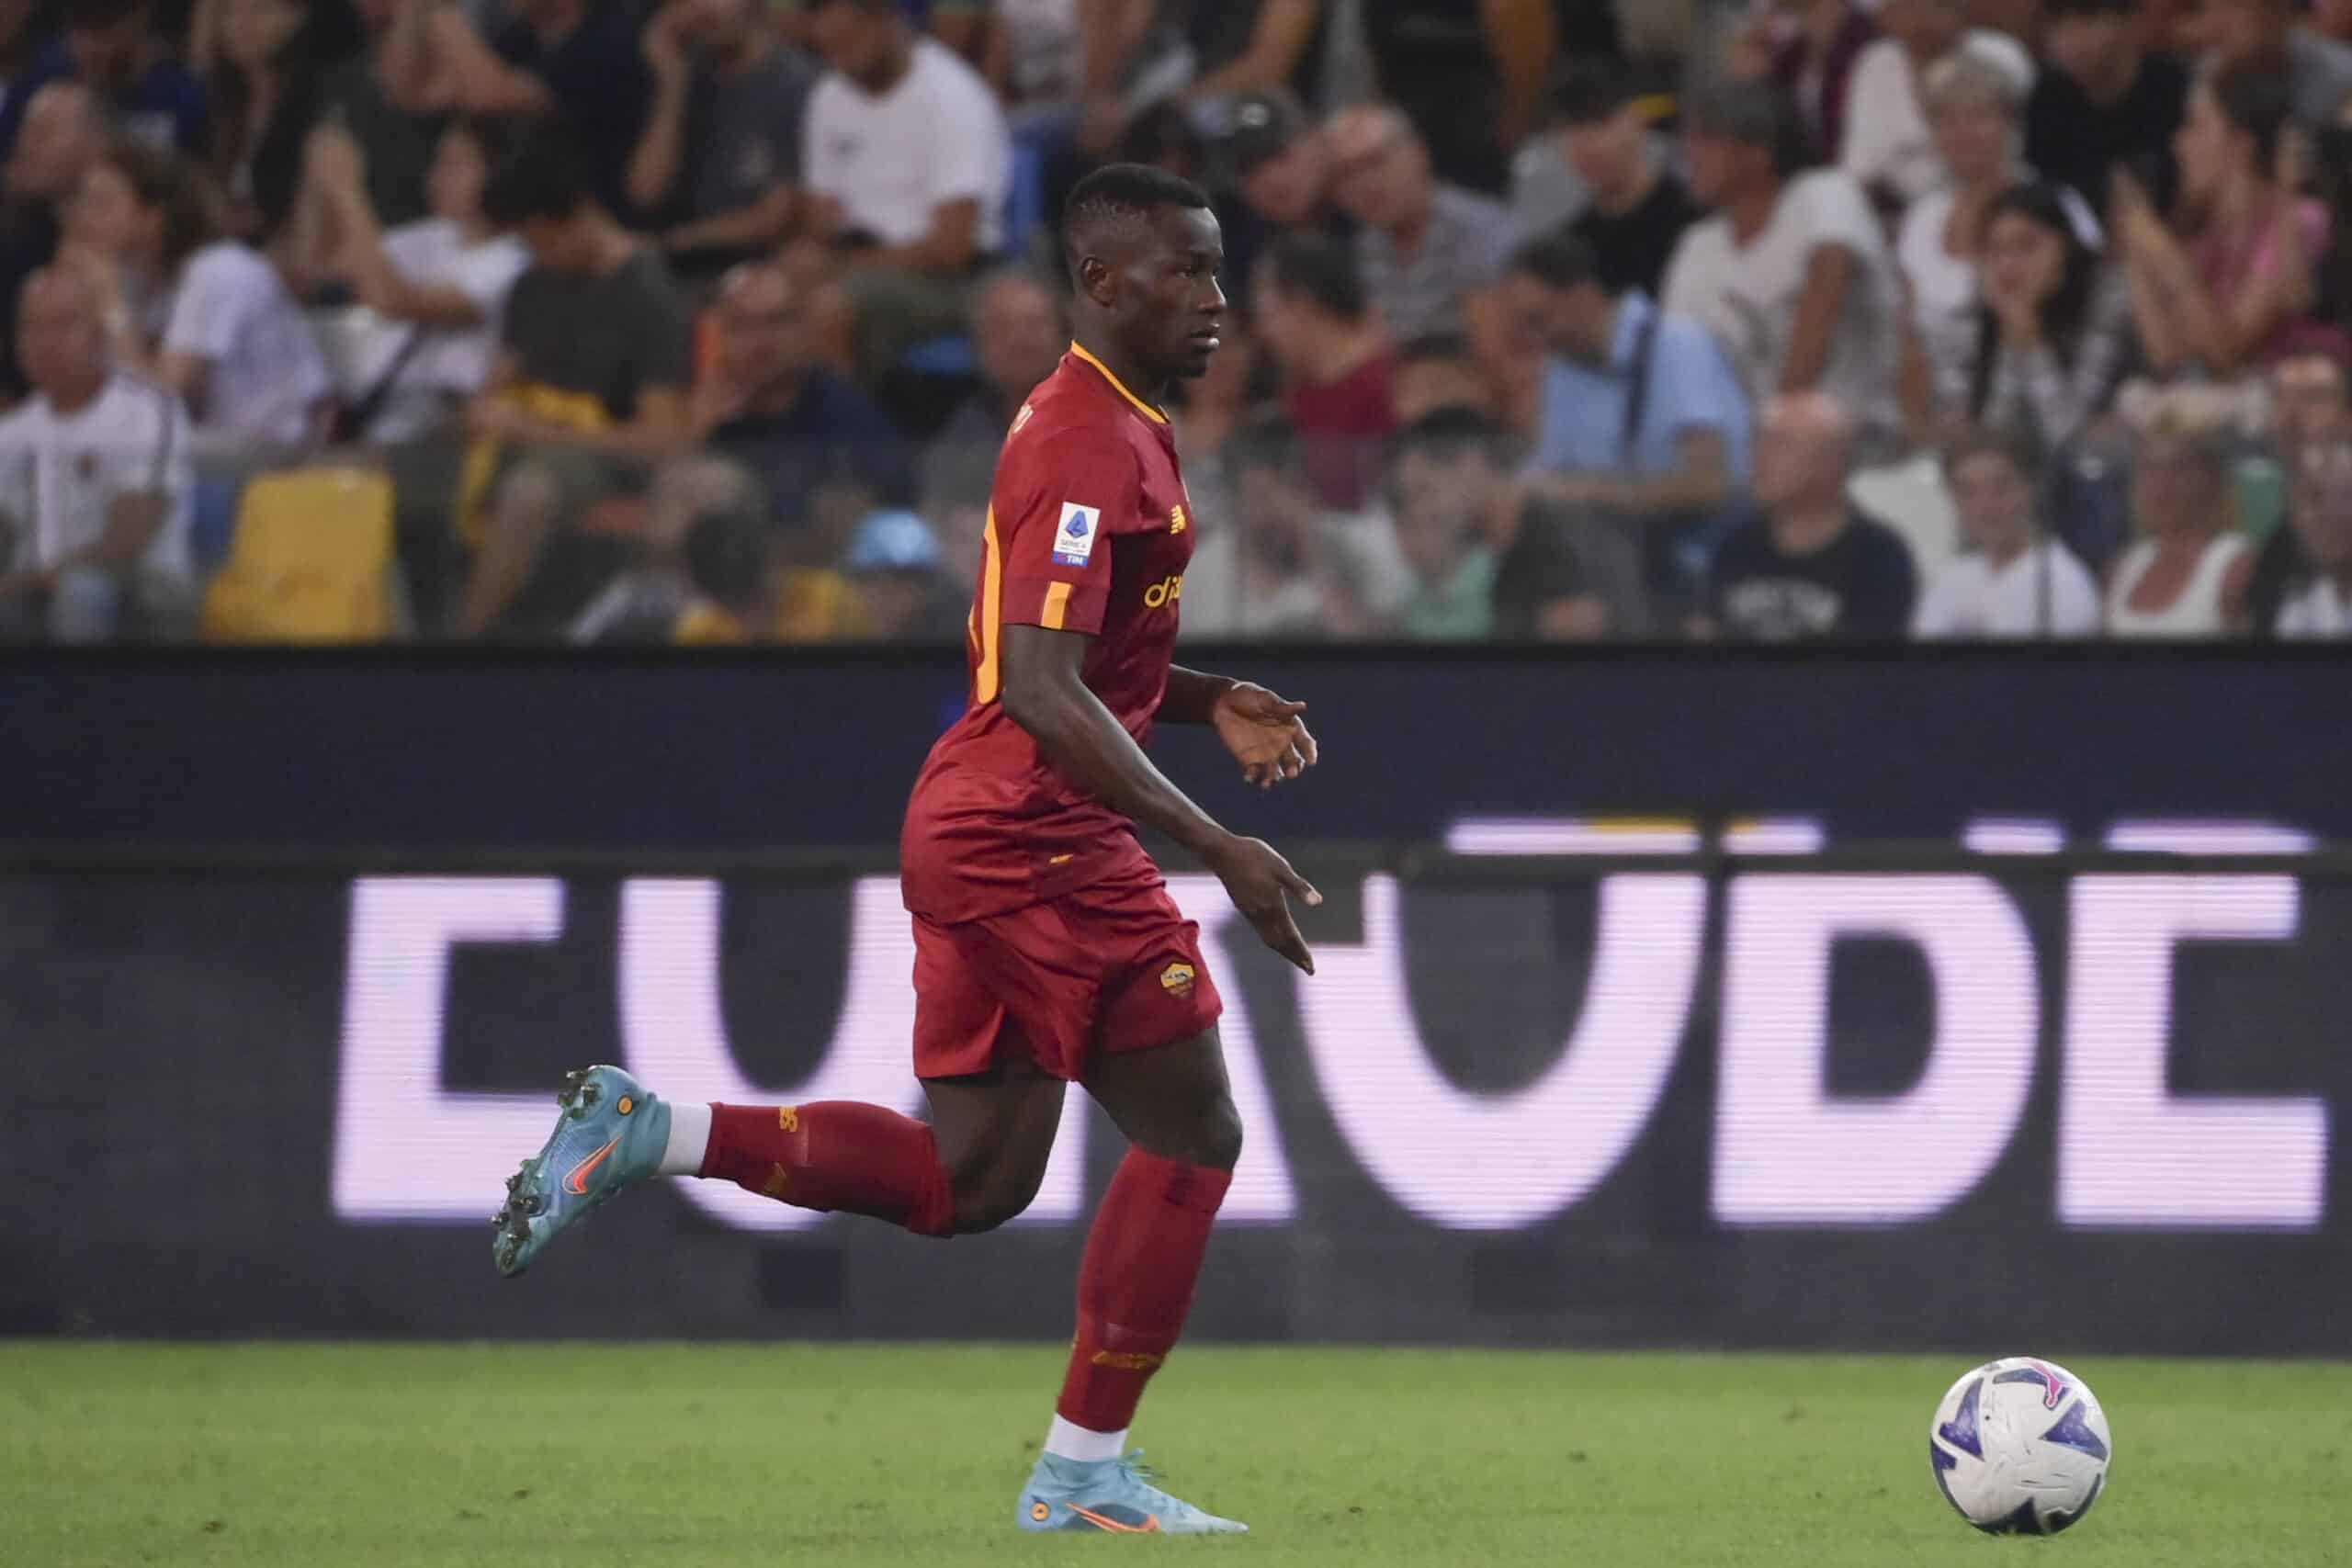 UDINE, ITALY - SEPTEMBER 04: AS Roma player Mady Camara during the Serie A match between Udinese Calcio and AS Roma at Dacia Arena on September 04, 2022 in Udine, Italy. (Photo by Luciano Rossi/AS Roma via Getty Images)